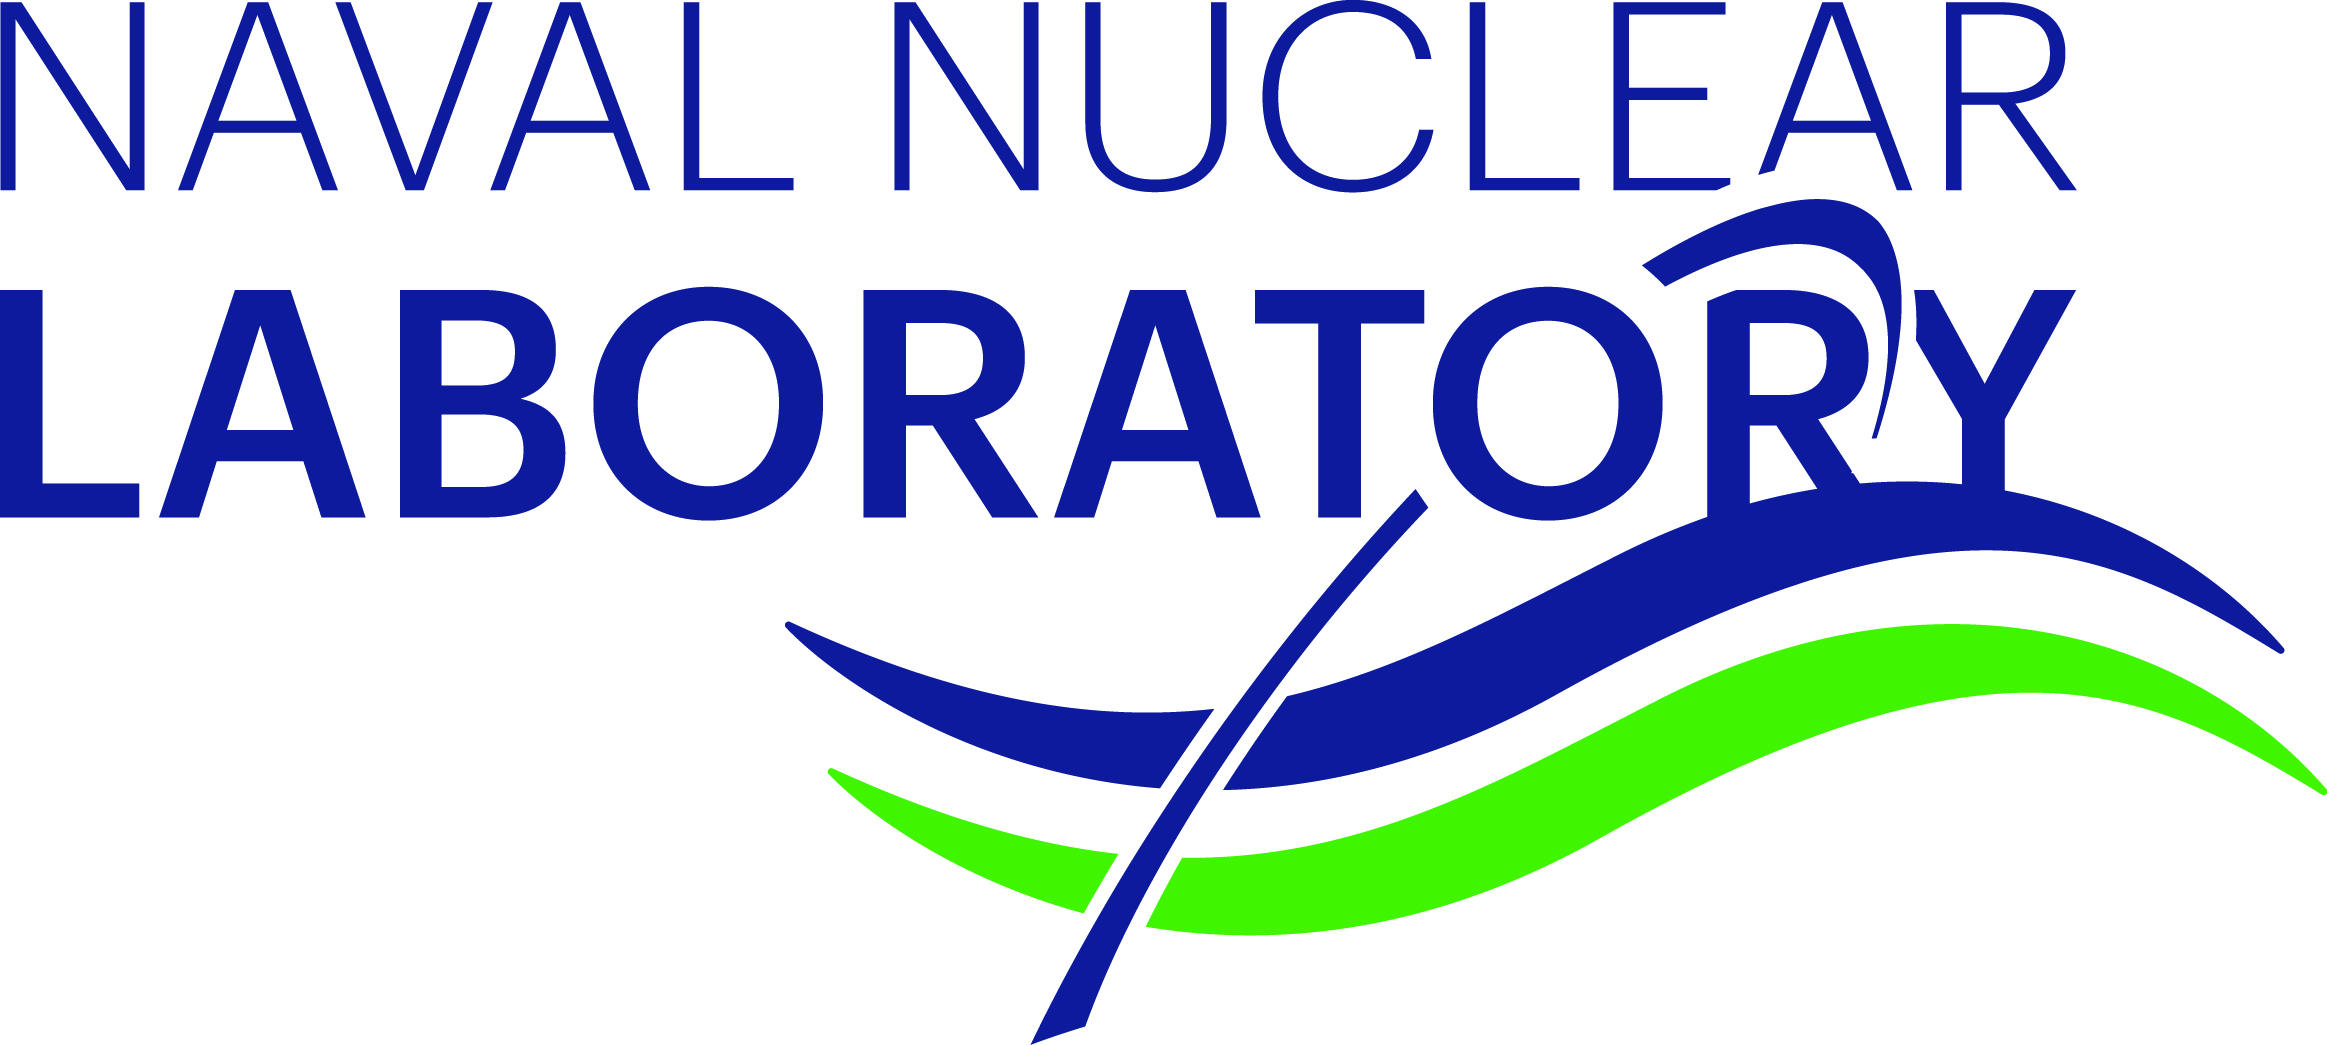 Naval Nuclear Laboratory